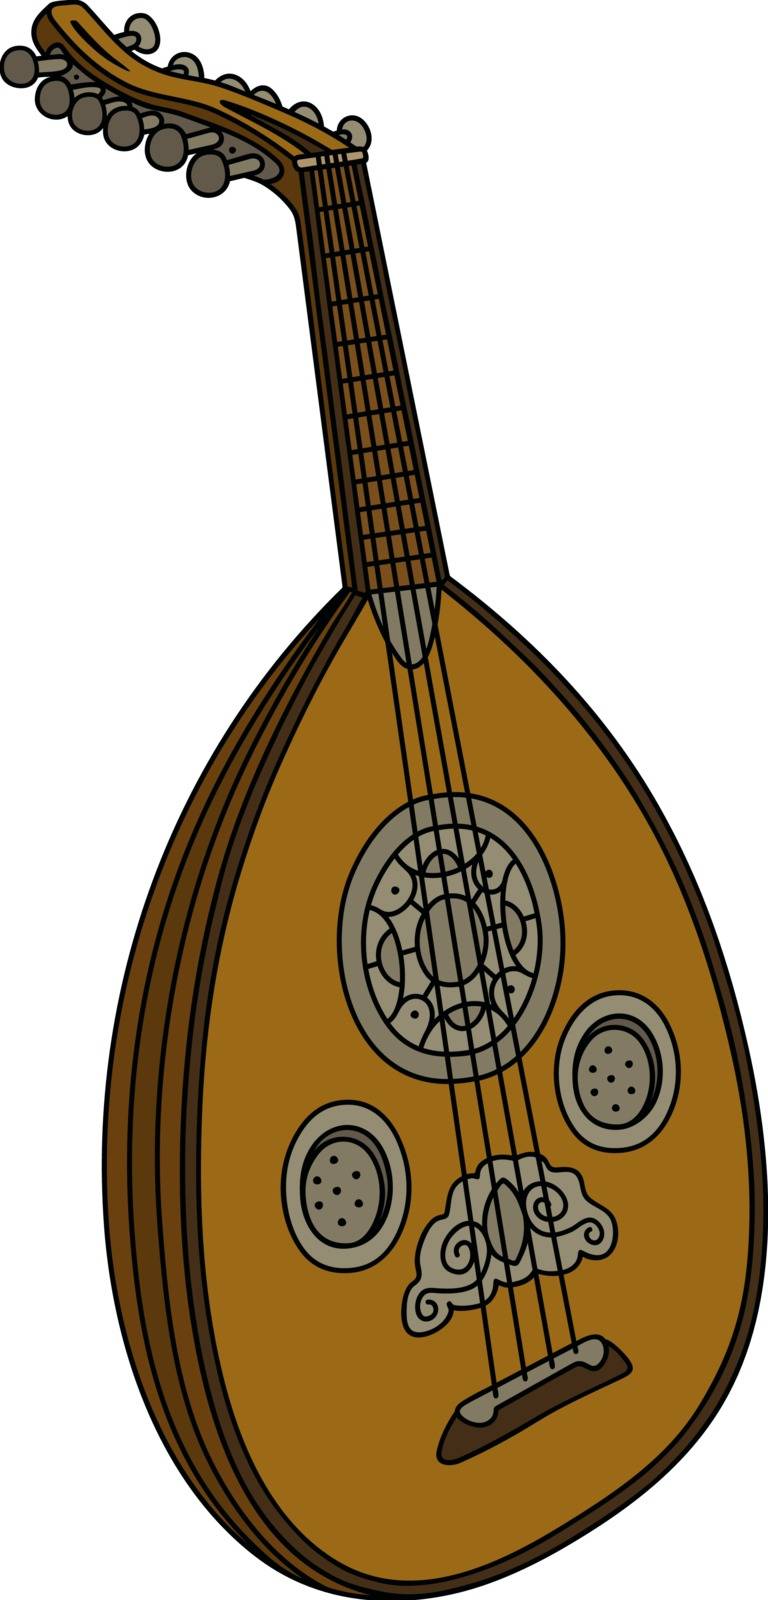 Hand drawing of a classic lute